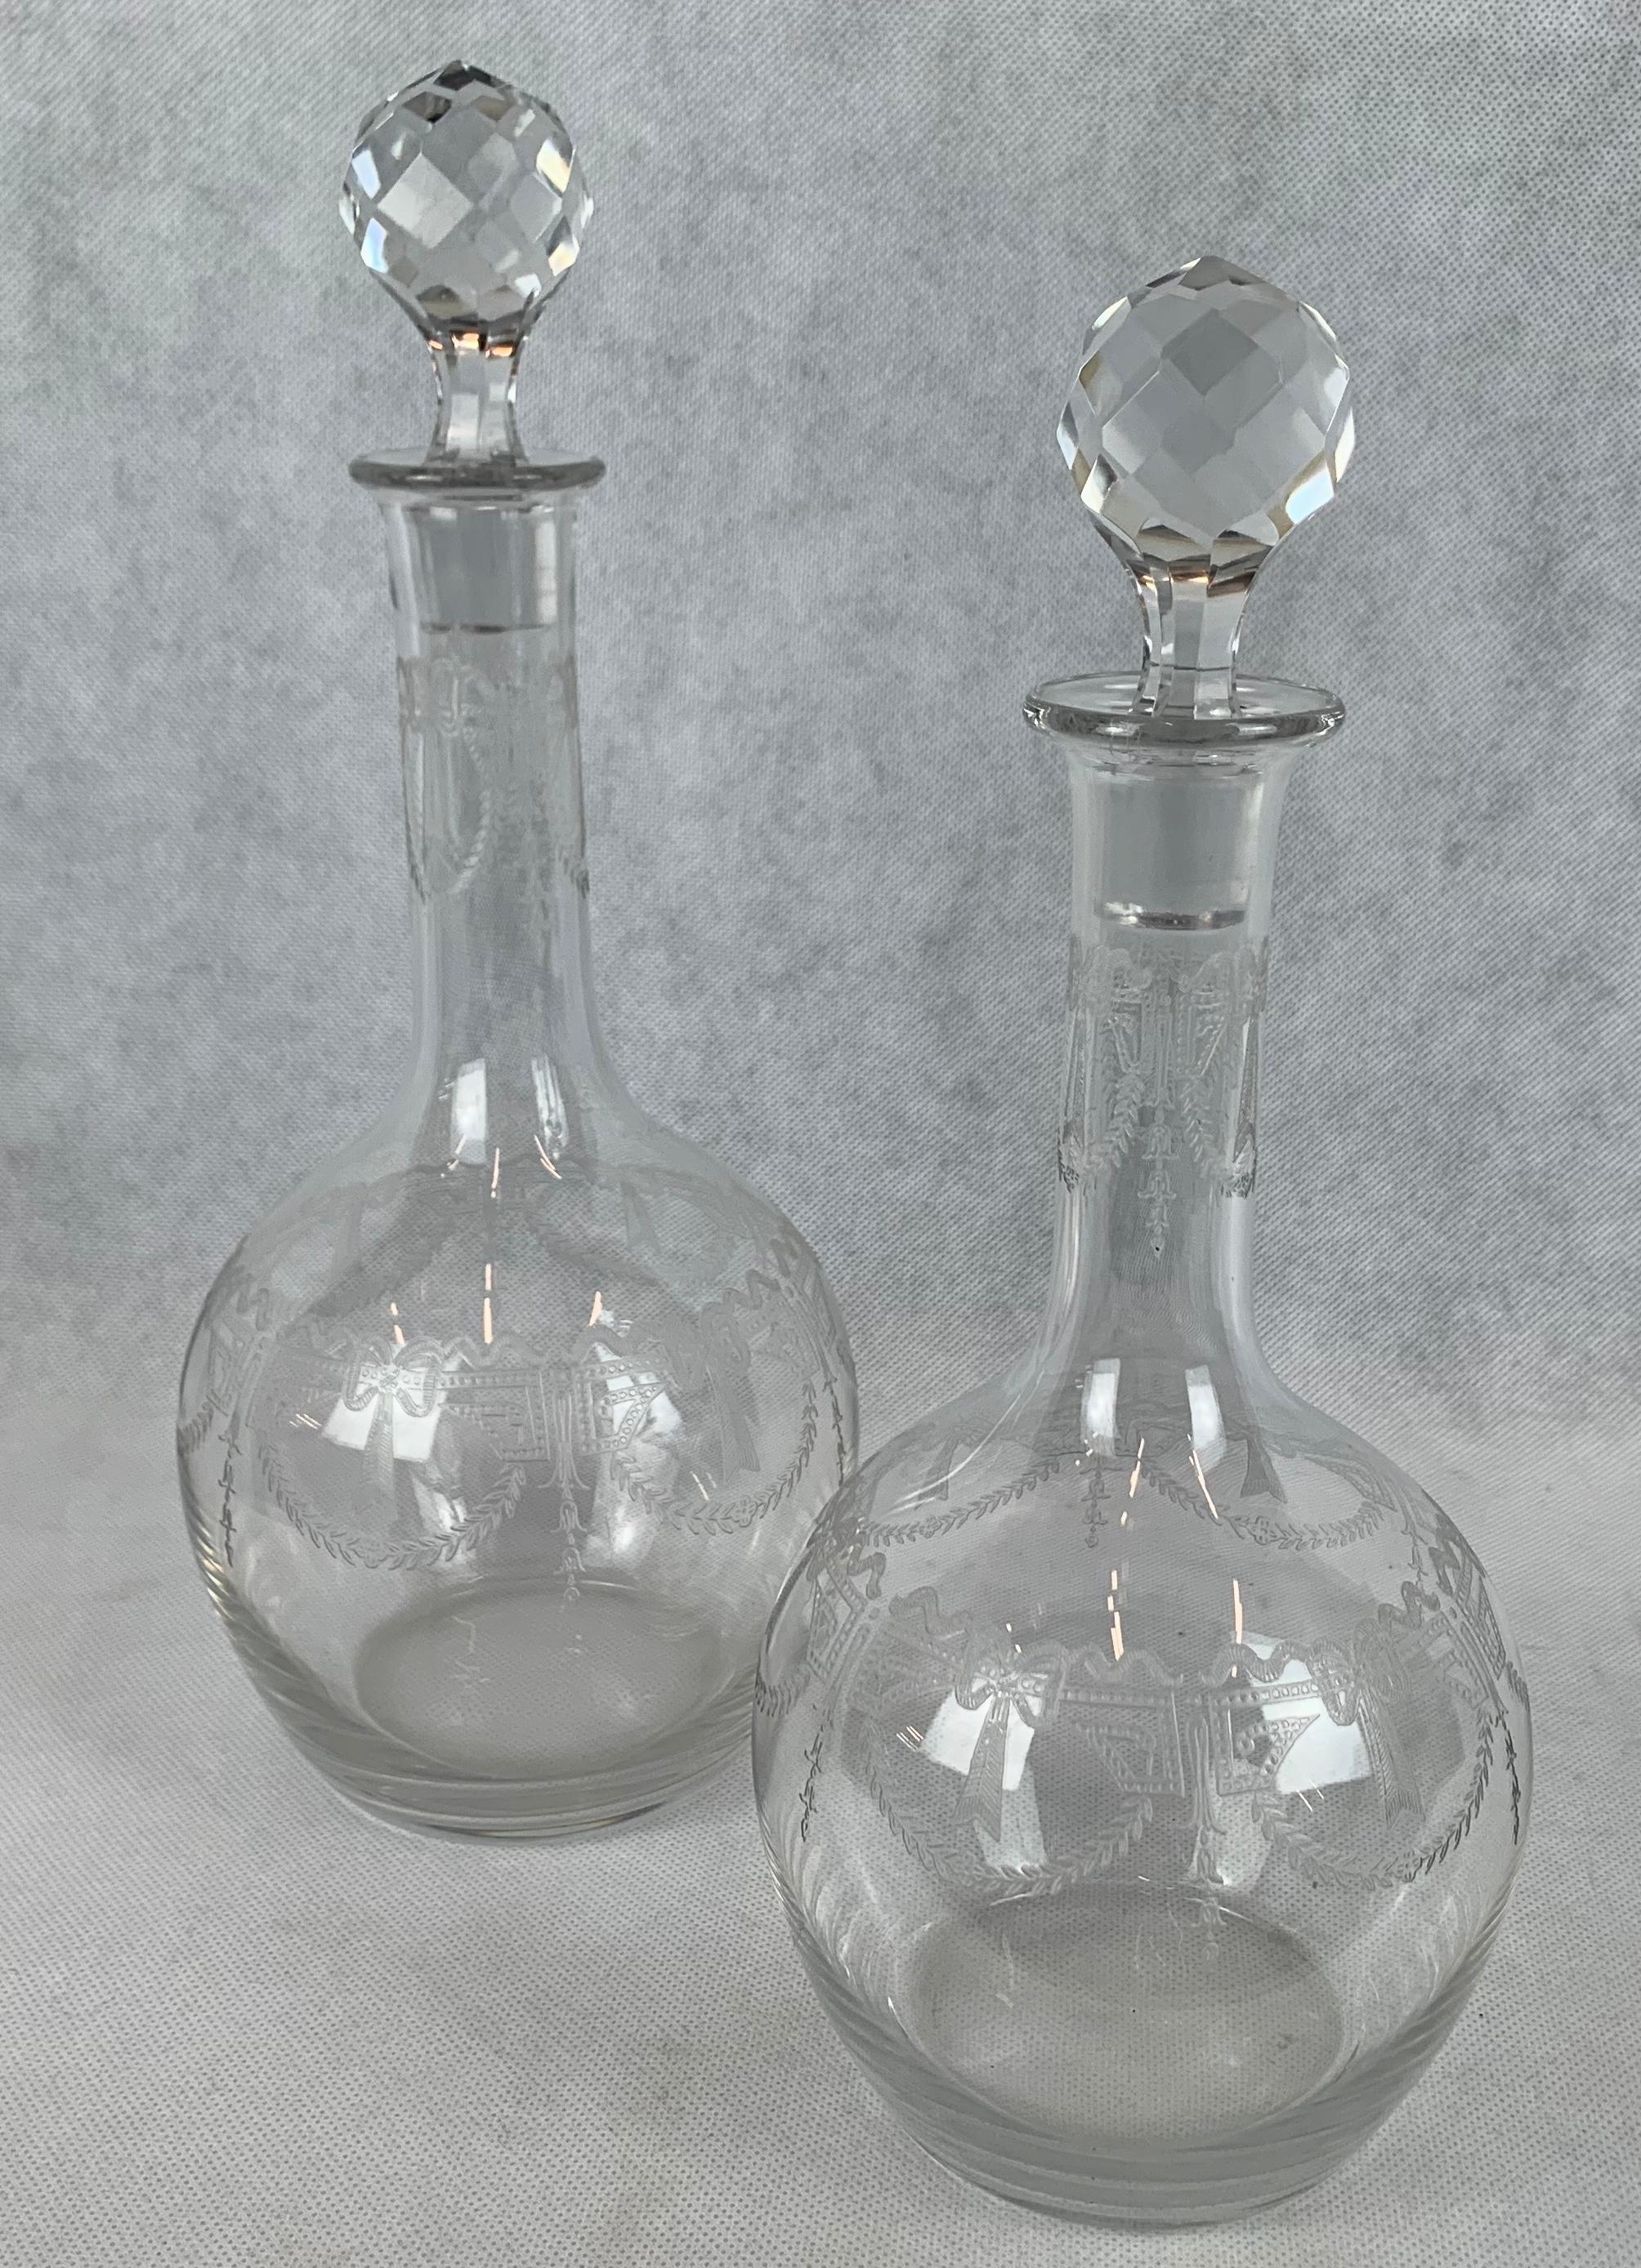 Set of French crystal decanters each having engraved bodies and faceted stoppers. There is a polished pontil on the bottom of each decanter. The design is swags of laurel leaves and curling ribbons and bows. The pair were probably part of a larger